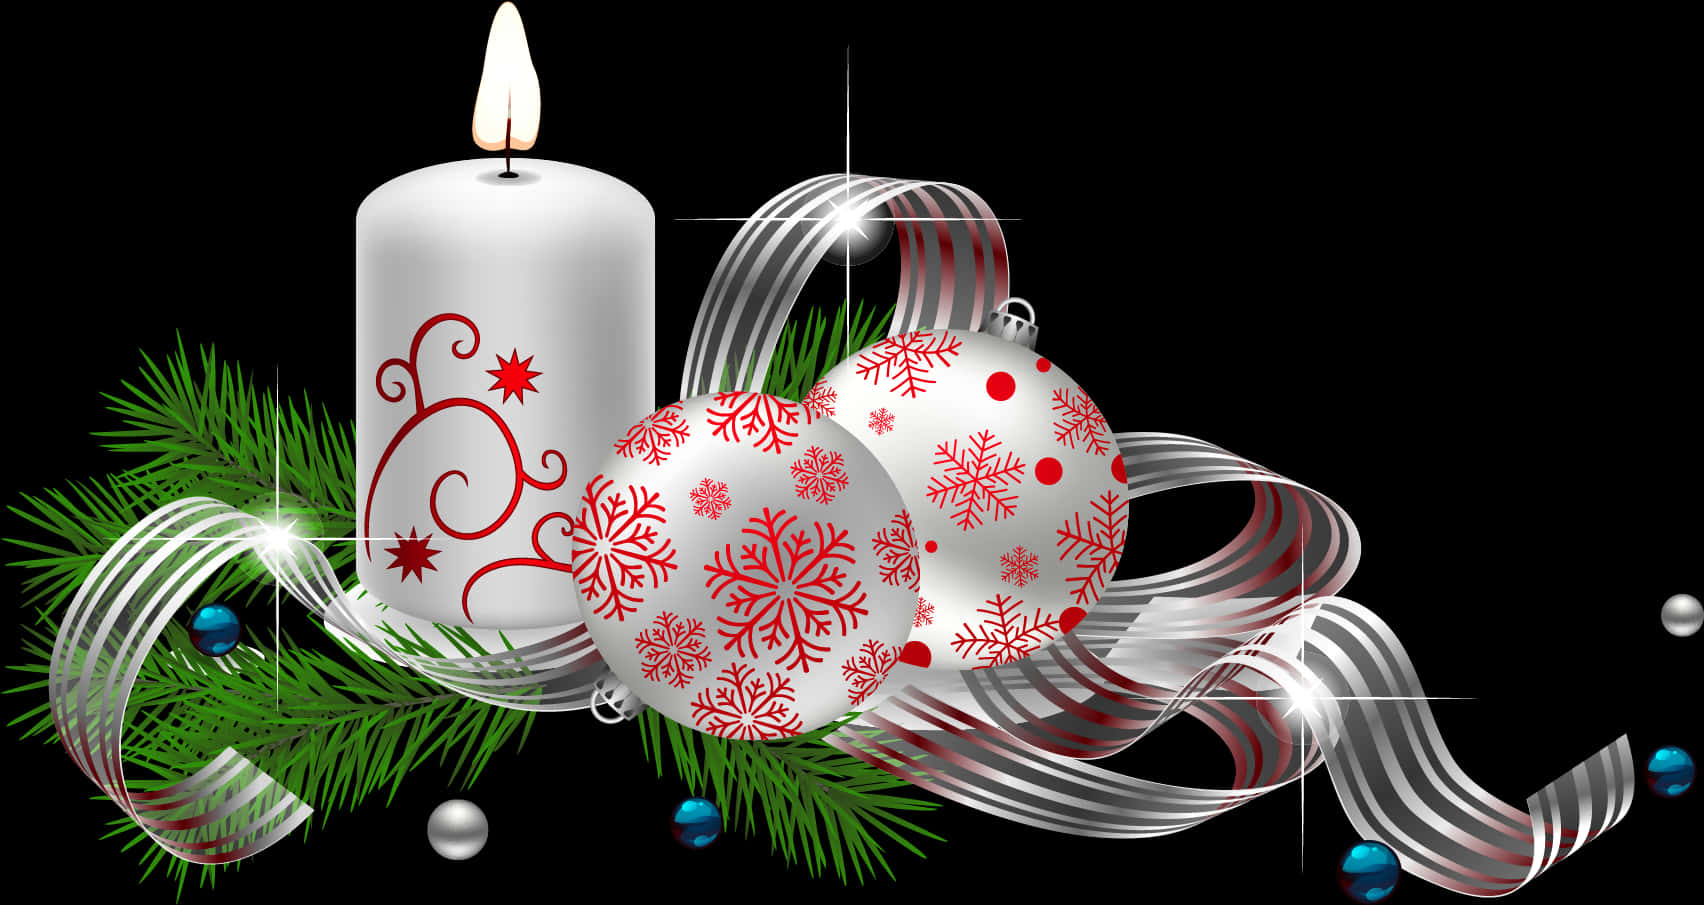 Christmas Candle Ornaments Decoration.jpg